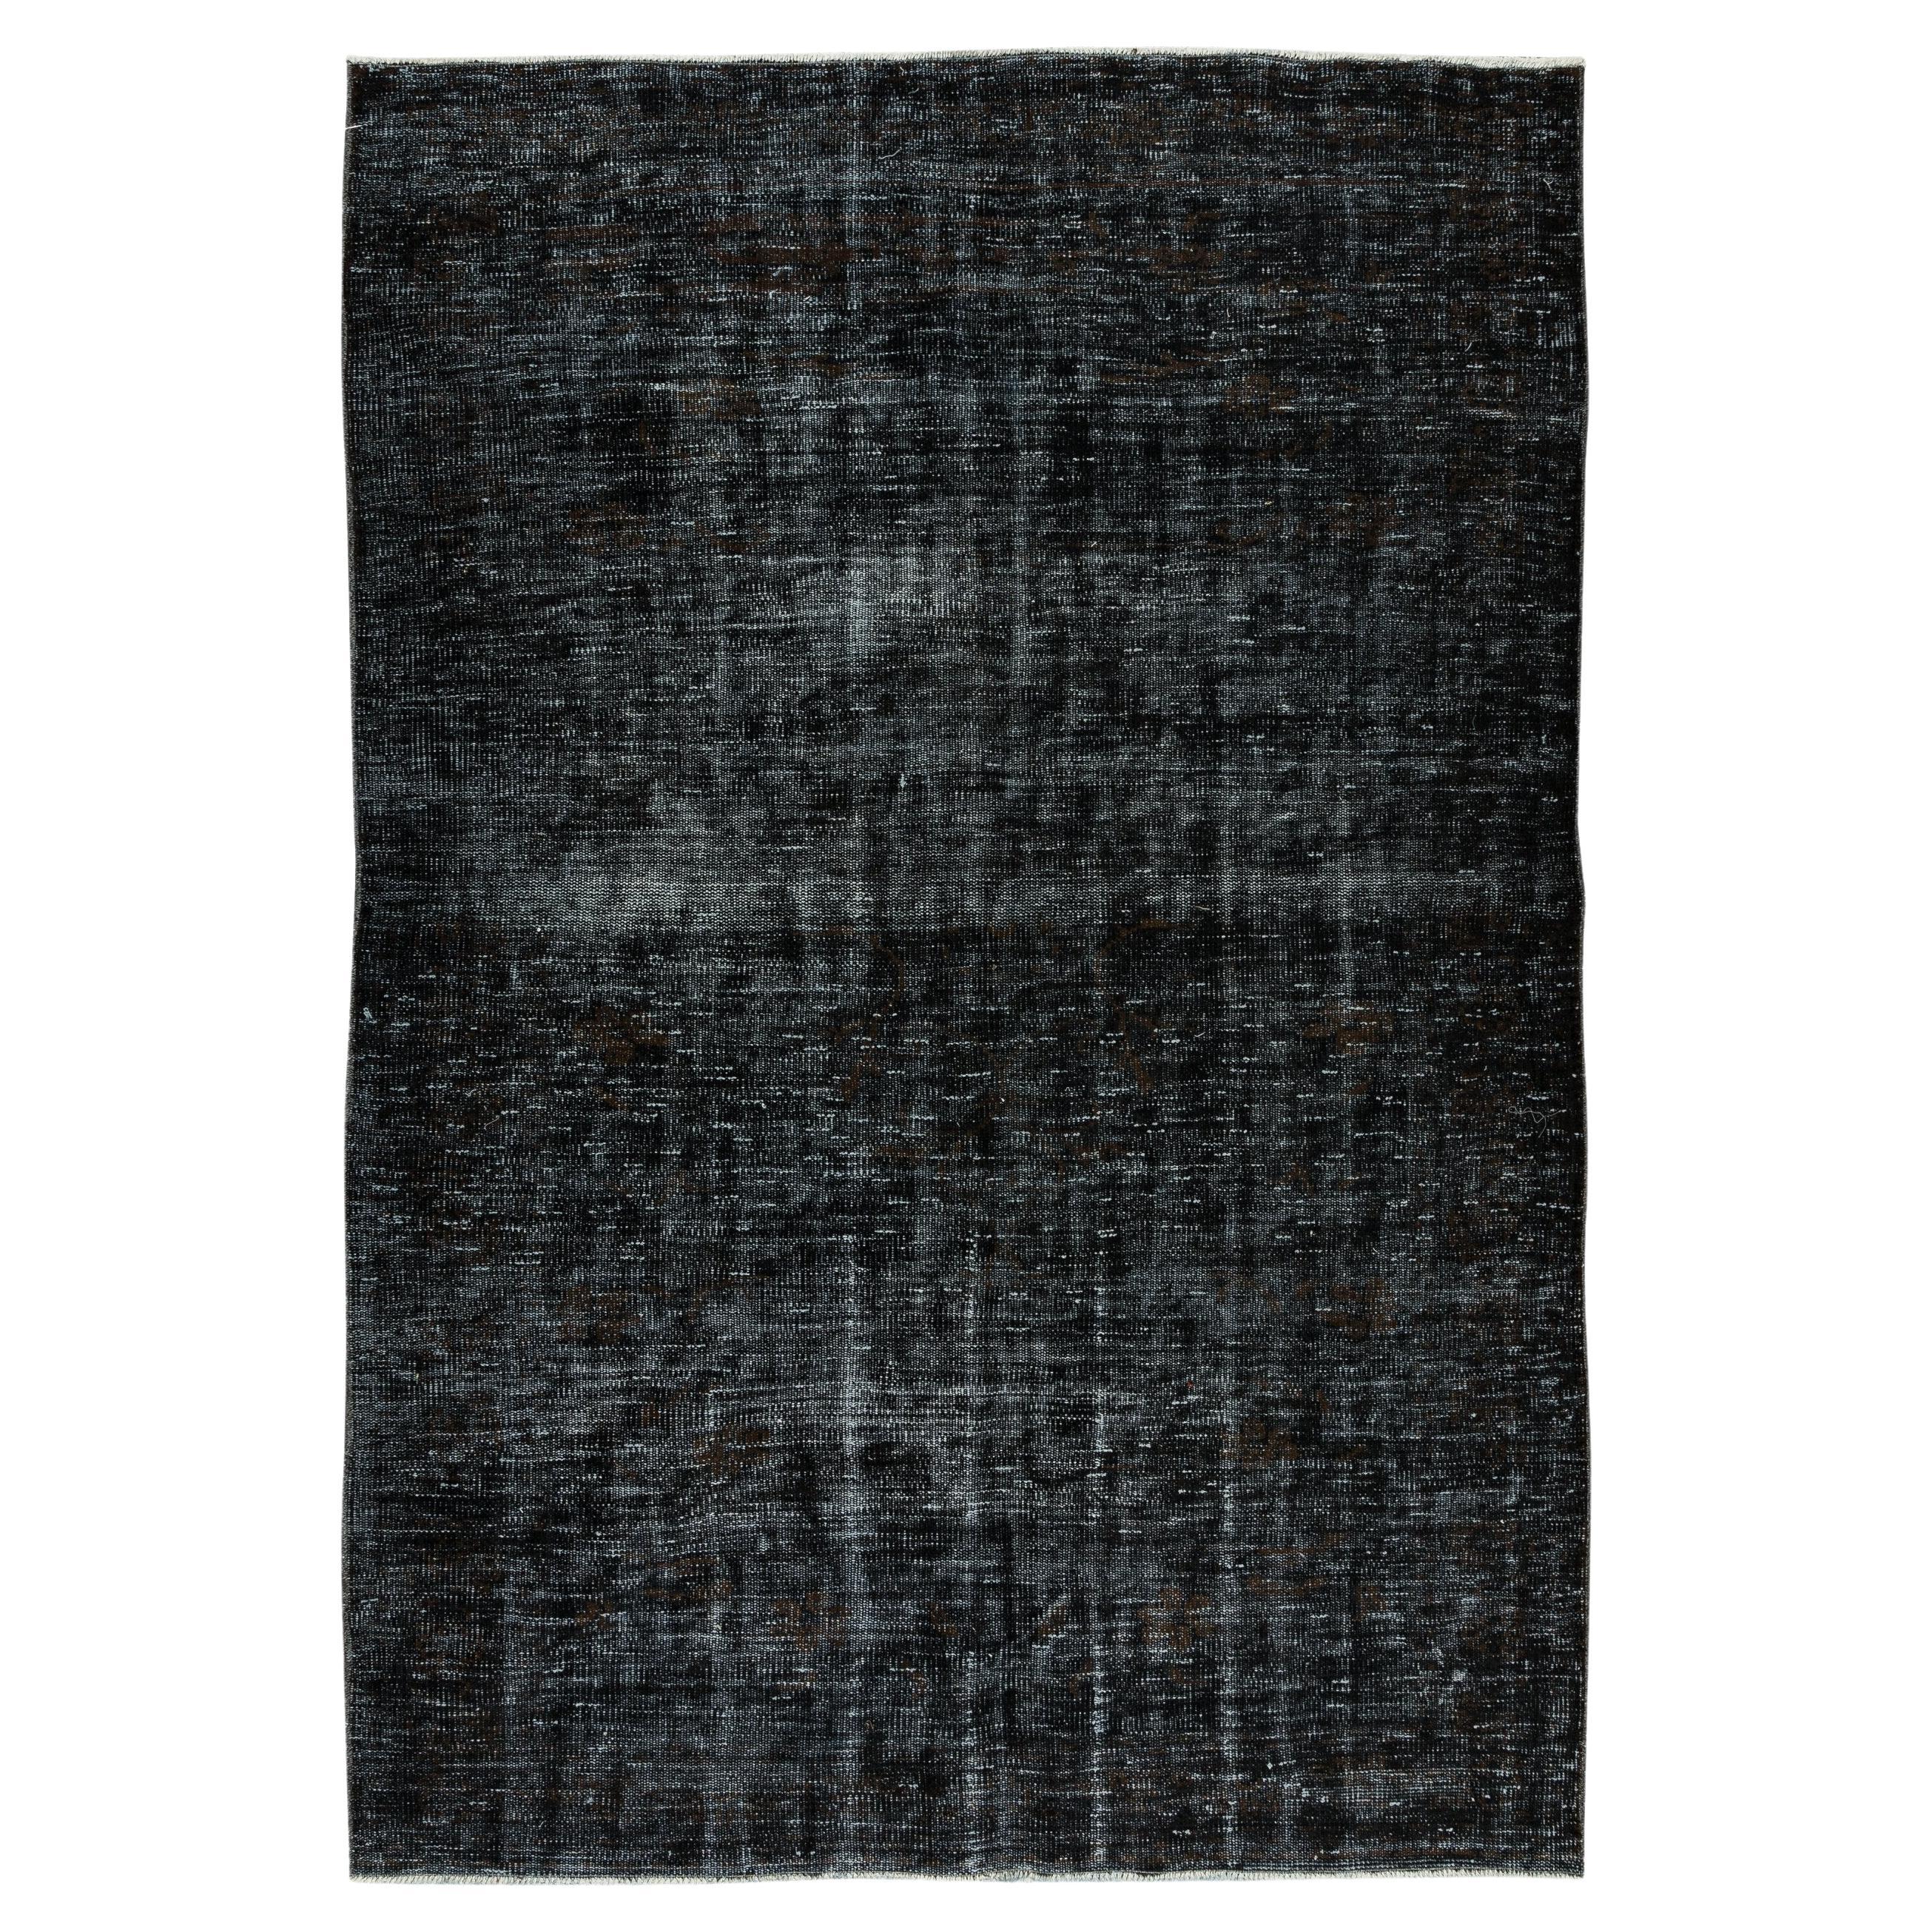 Contemporary Turkish Rug Over-Dyed in Black, Vintage Handmade Carpet